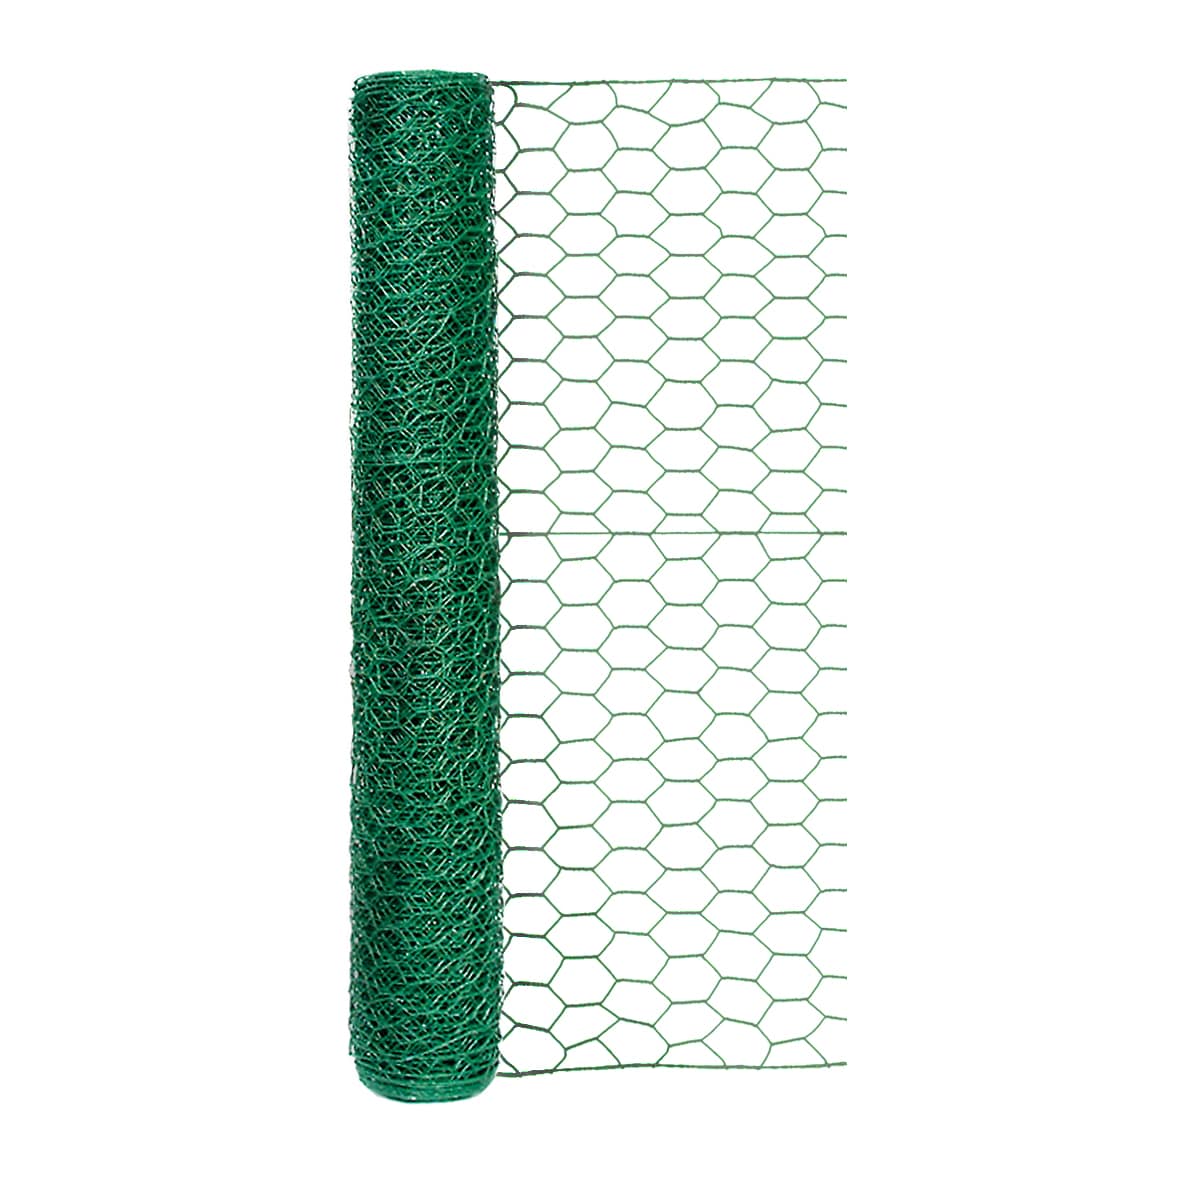 1/2, 3/4 inch Galvanized and PVC Coated Chicken Wire for Poultry Livestock